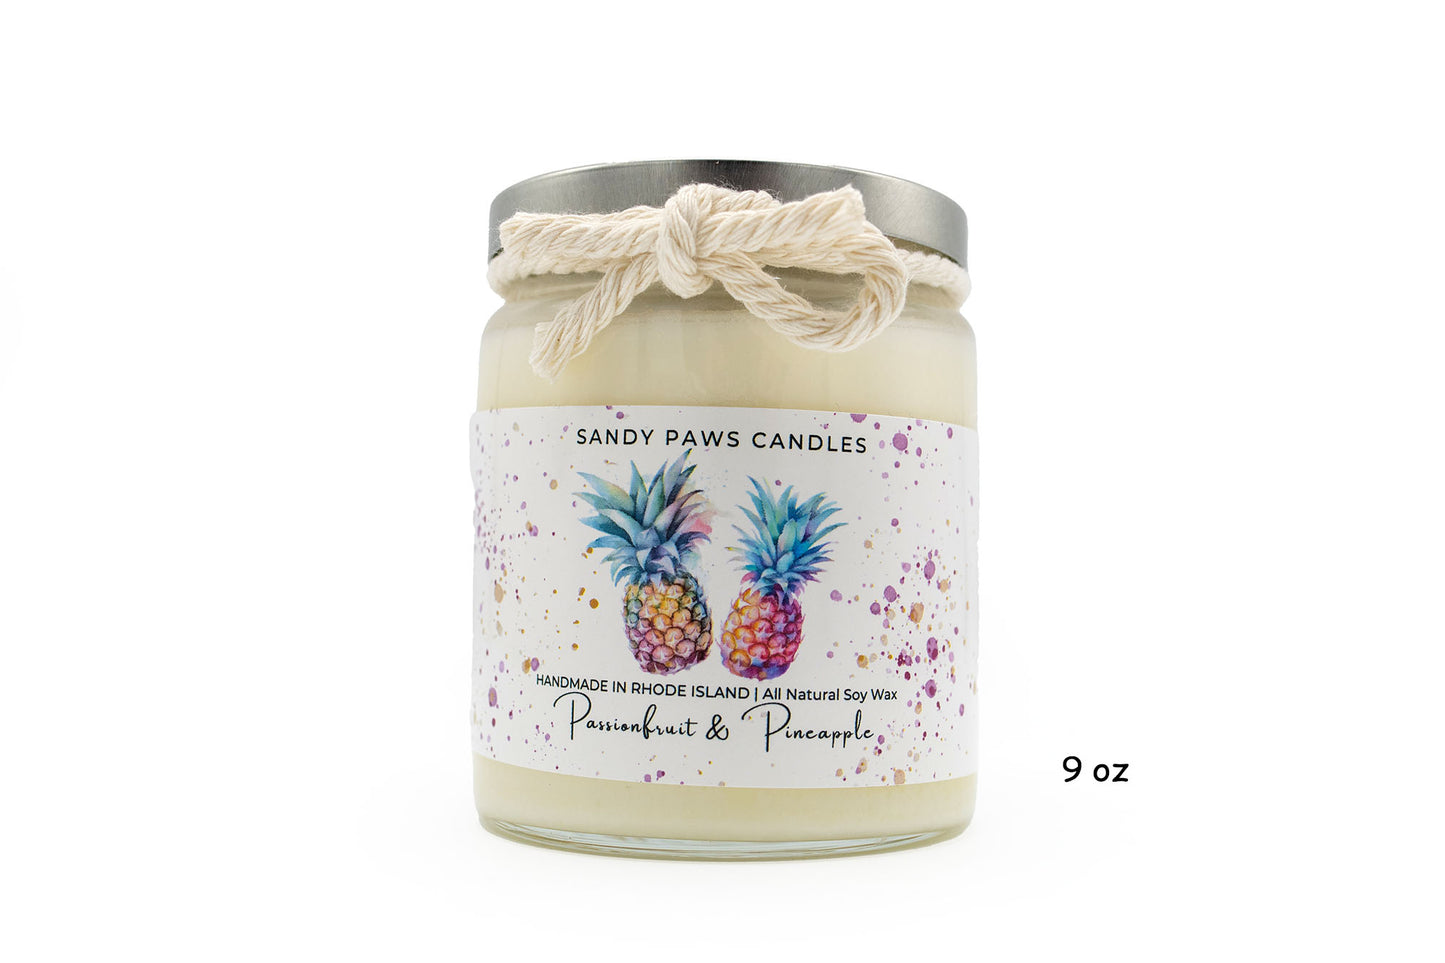 Passionfruit Pineapple Soy Wax Candle